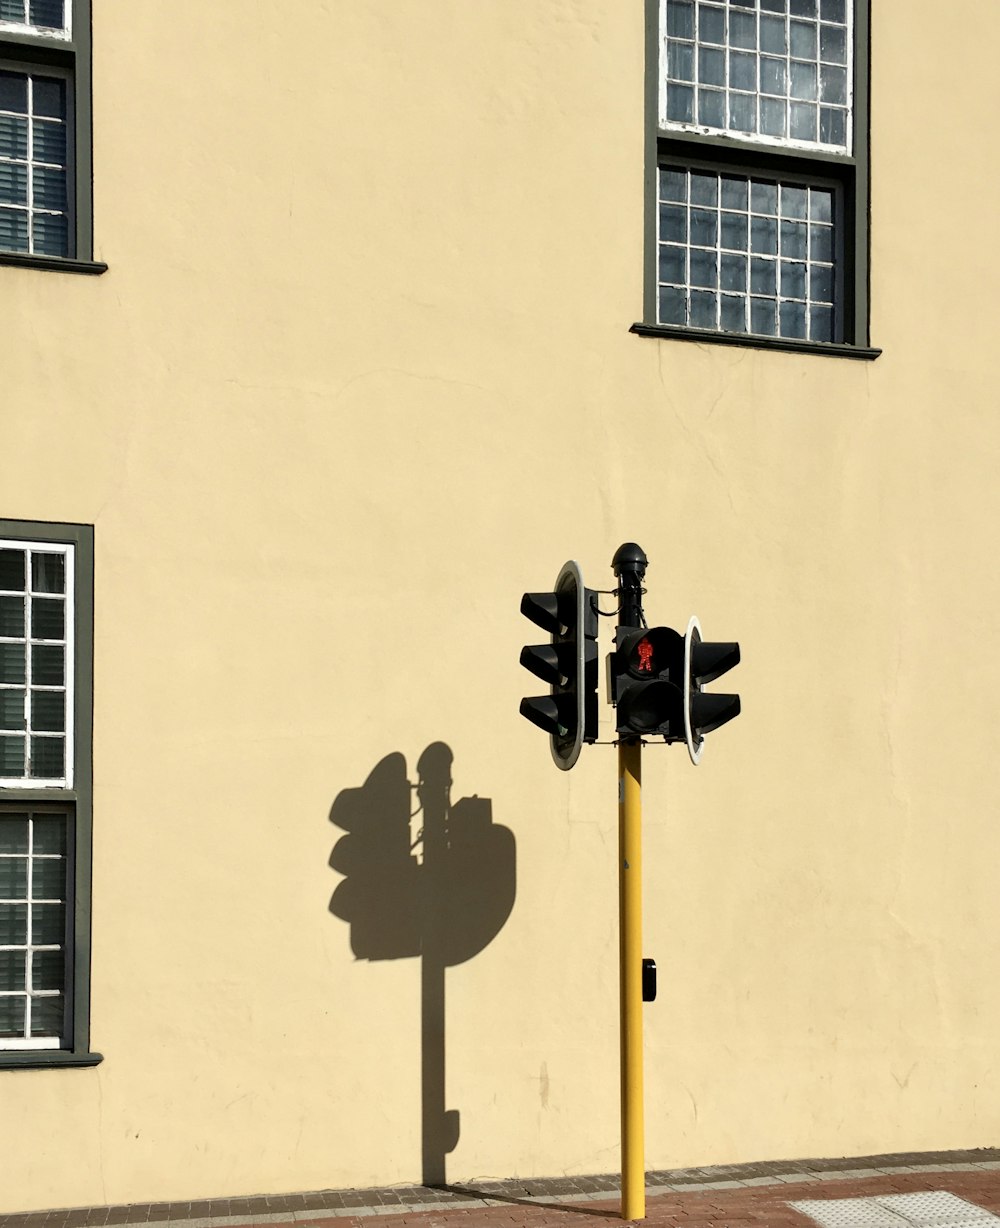 a shadow of a traffic light on a street